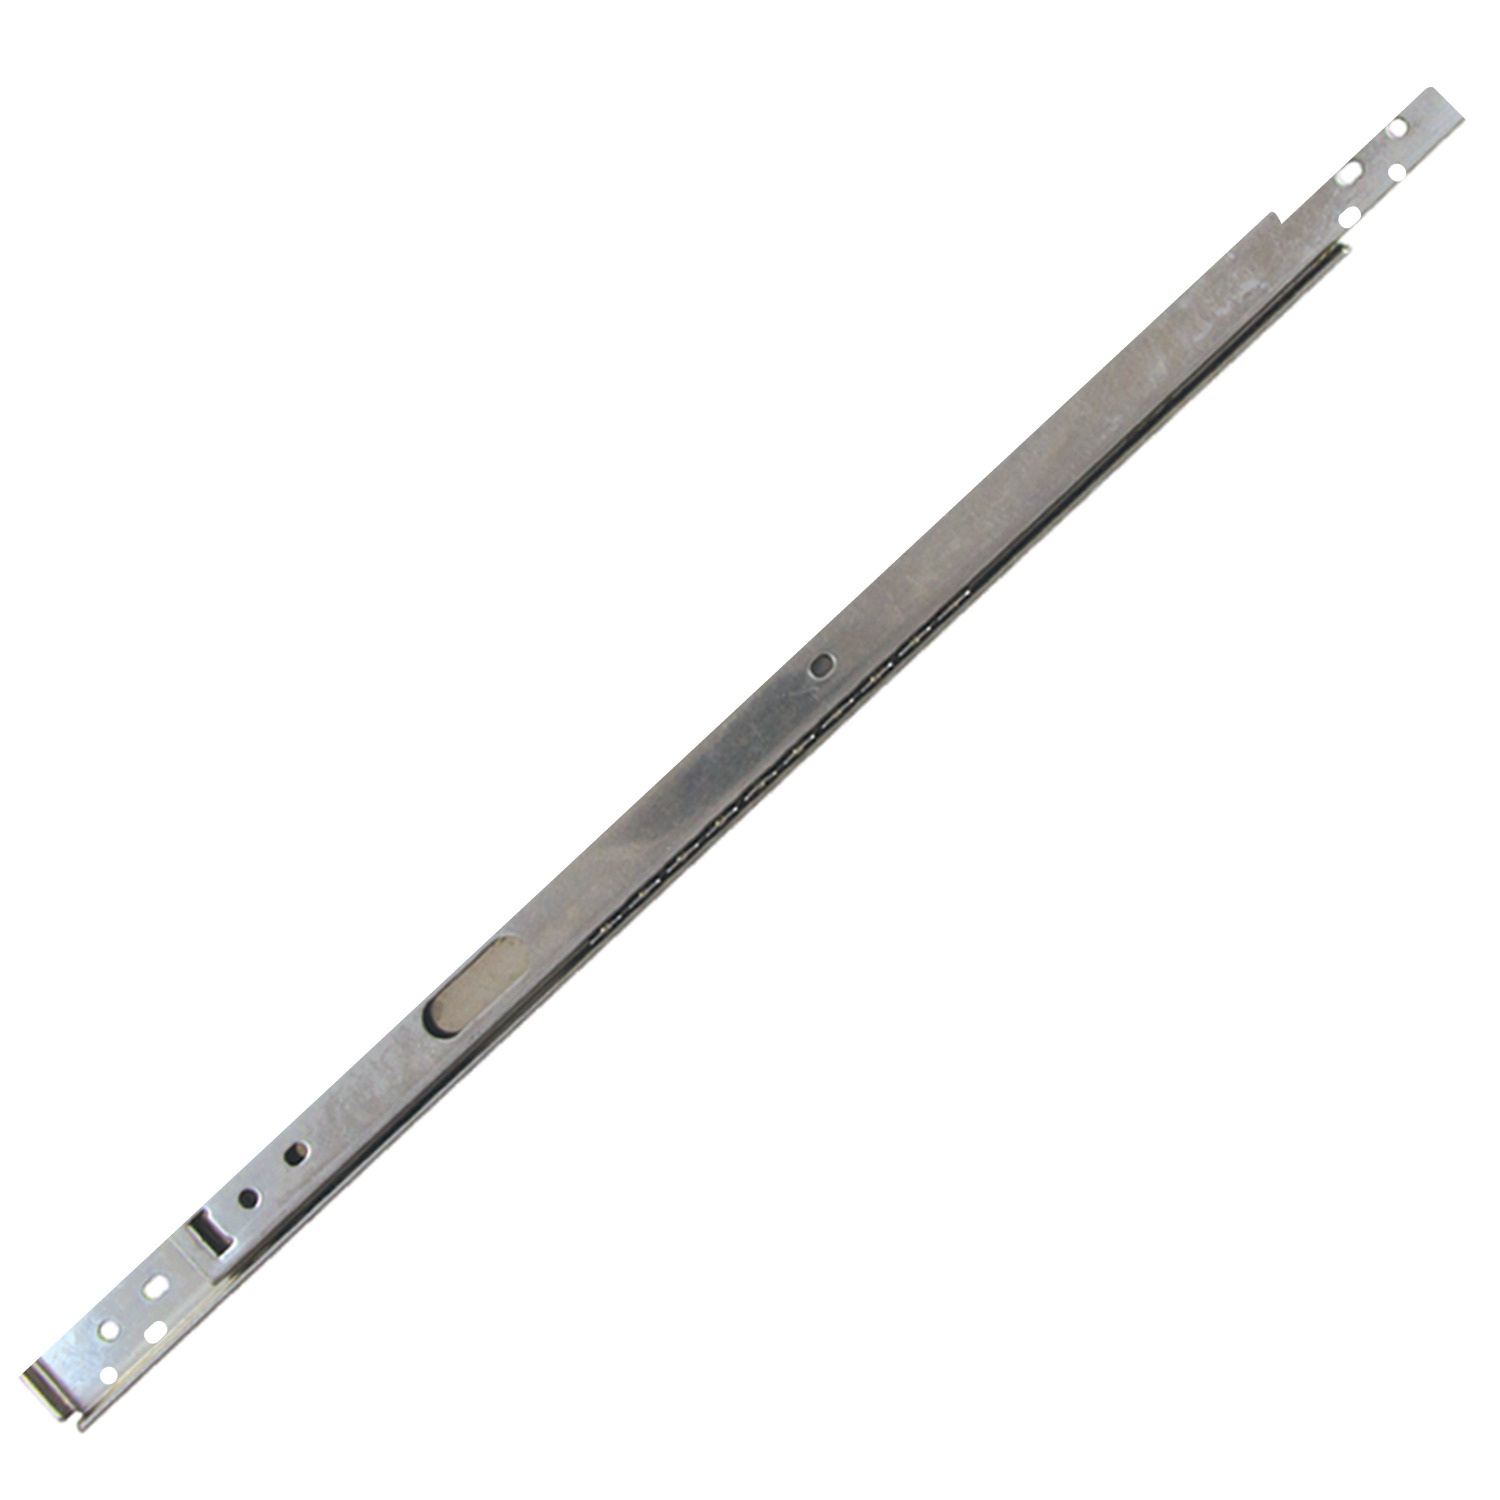 P7000.AC0200 Drawer Slide 3/4 Extn Length 200; Load 15kg per pair. Sold Individually. Stainless